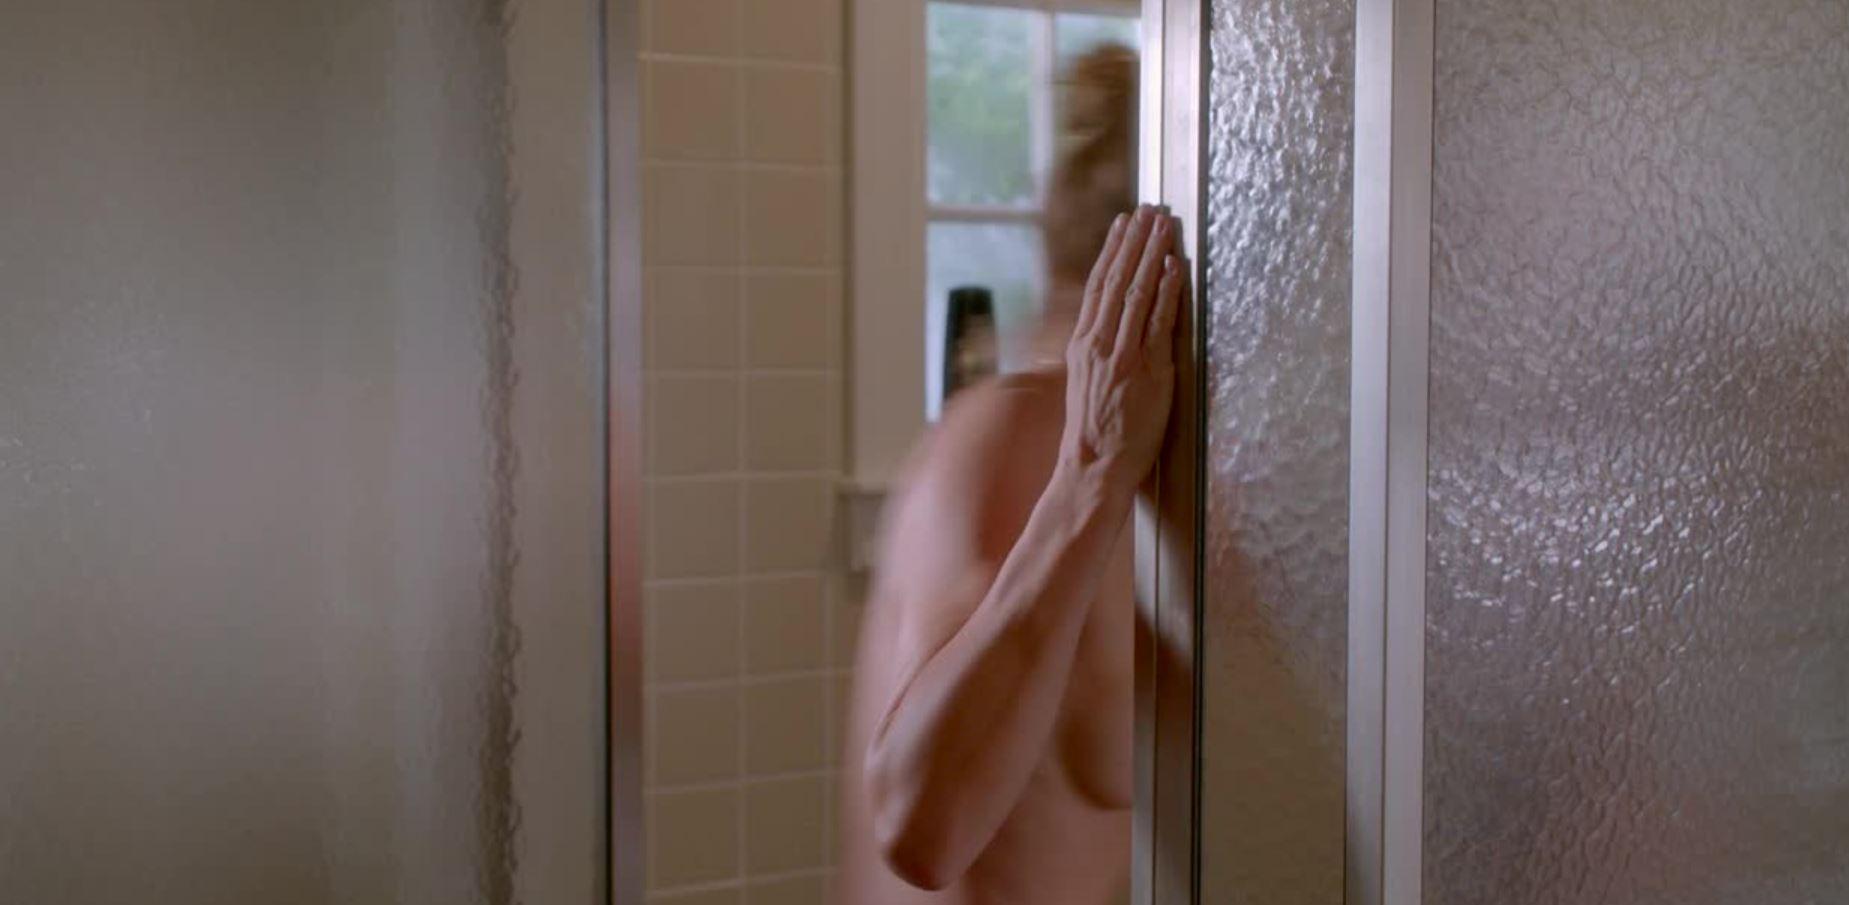 Naked Cameron Diaz In Sex Tape